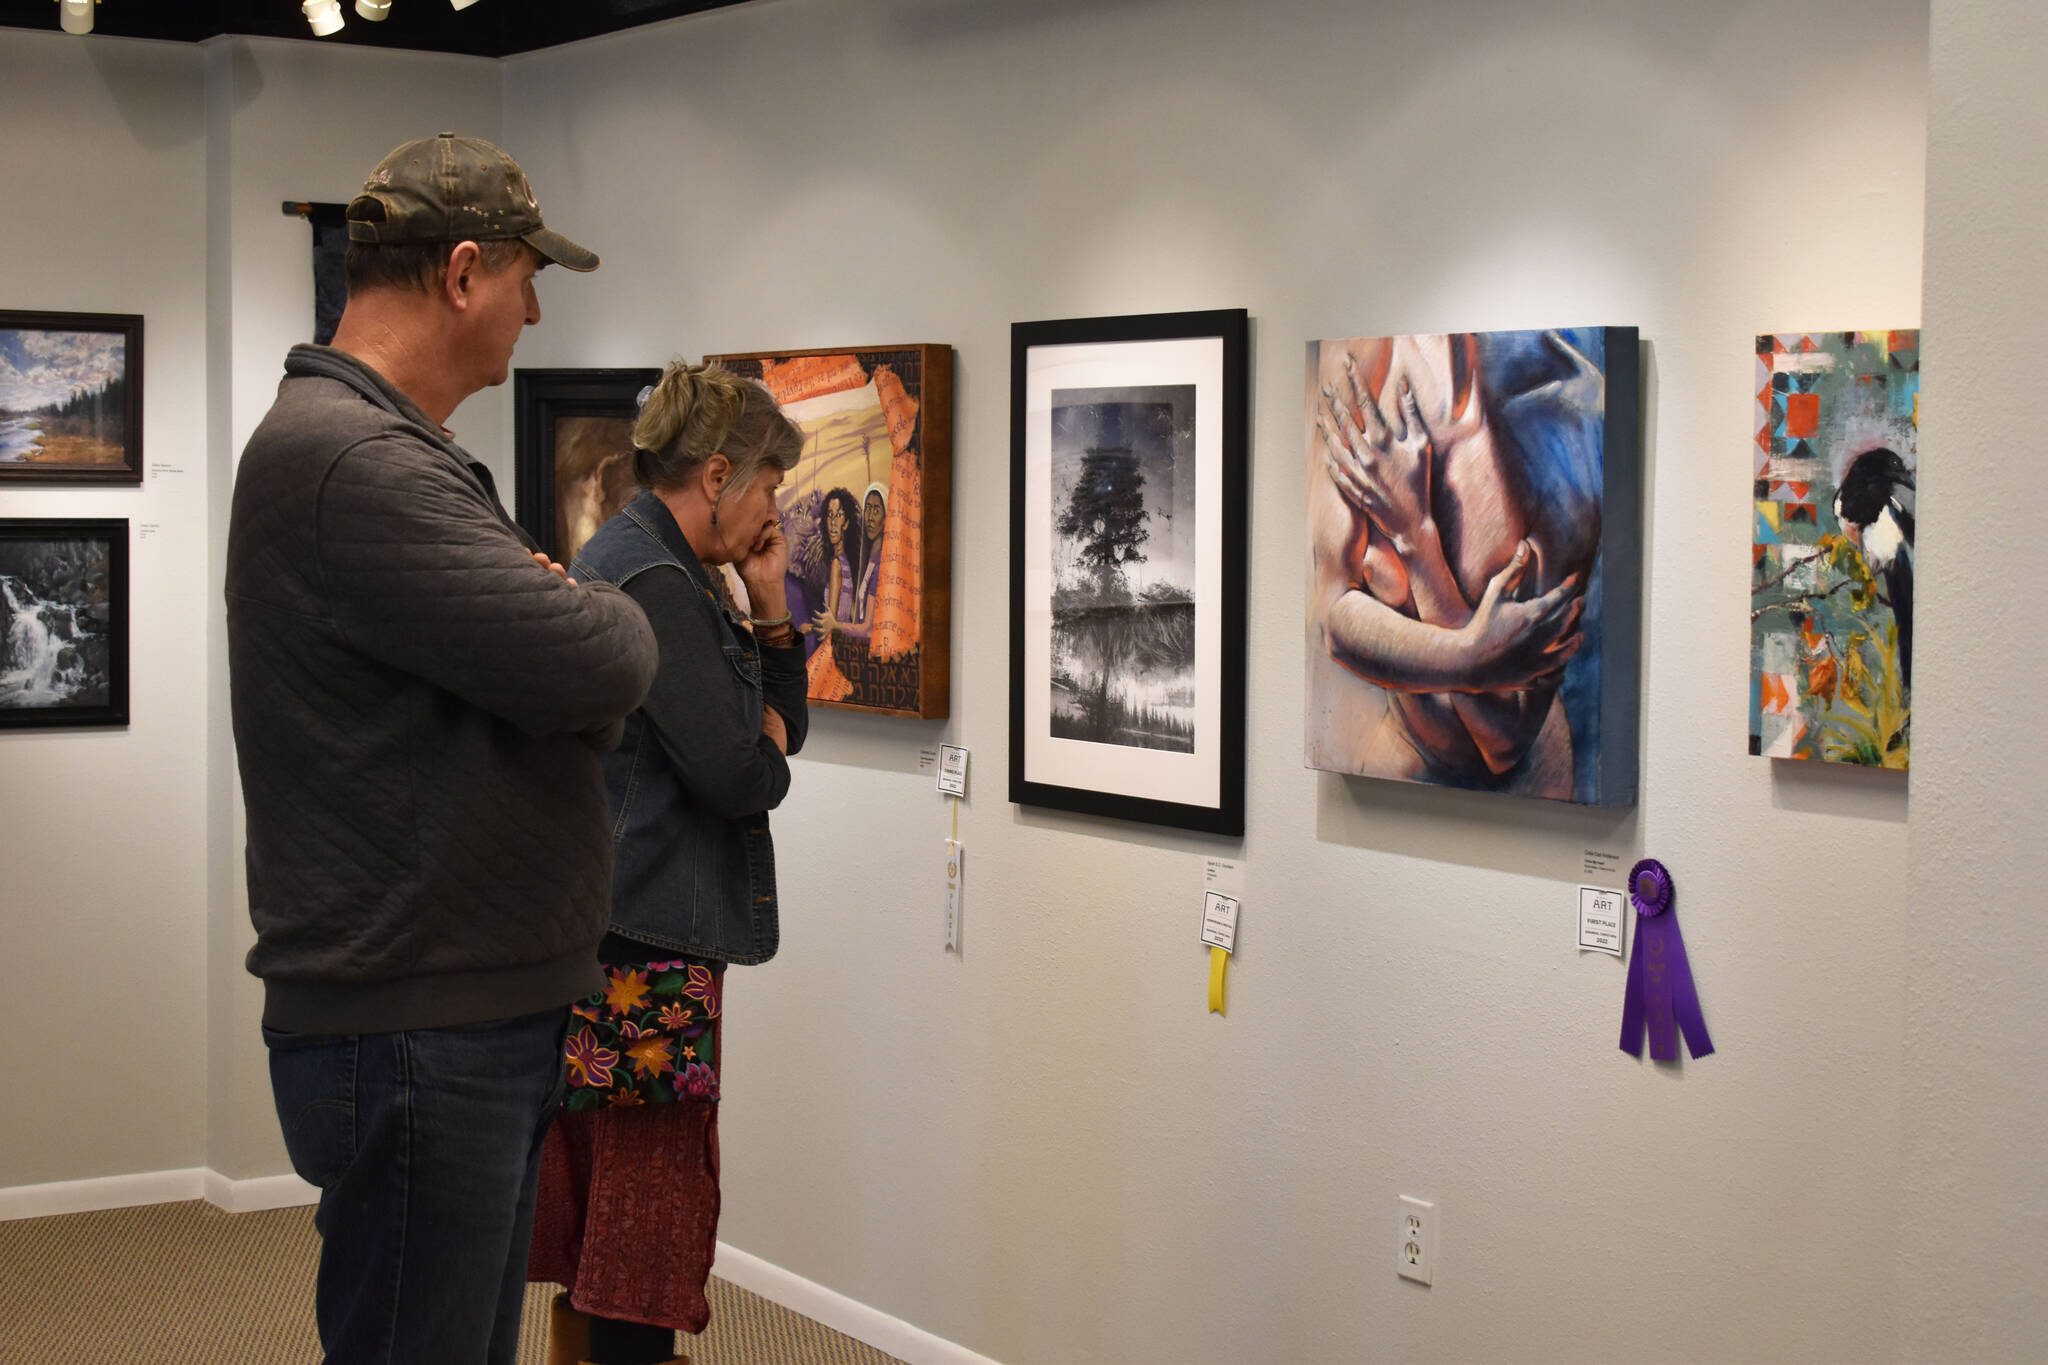 Attendees of the opening reception of the Kenai Art Center Biennial Juried Show look at a wall of art that includes Best of Show winner “Cross My Heart,” an untitled photograph which won honorable mention, the third place winner “Civil Disobedience,” and Juror’s Choice “The Dead Skate,” on Thursday, Oct. 6, 2022, at the Kenai Art Center in Kenai, Alaska. (Jake Dye/Peninsula Clarion)